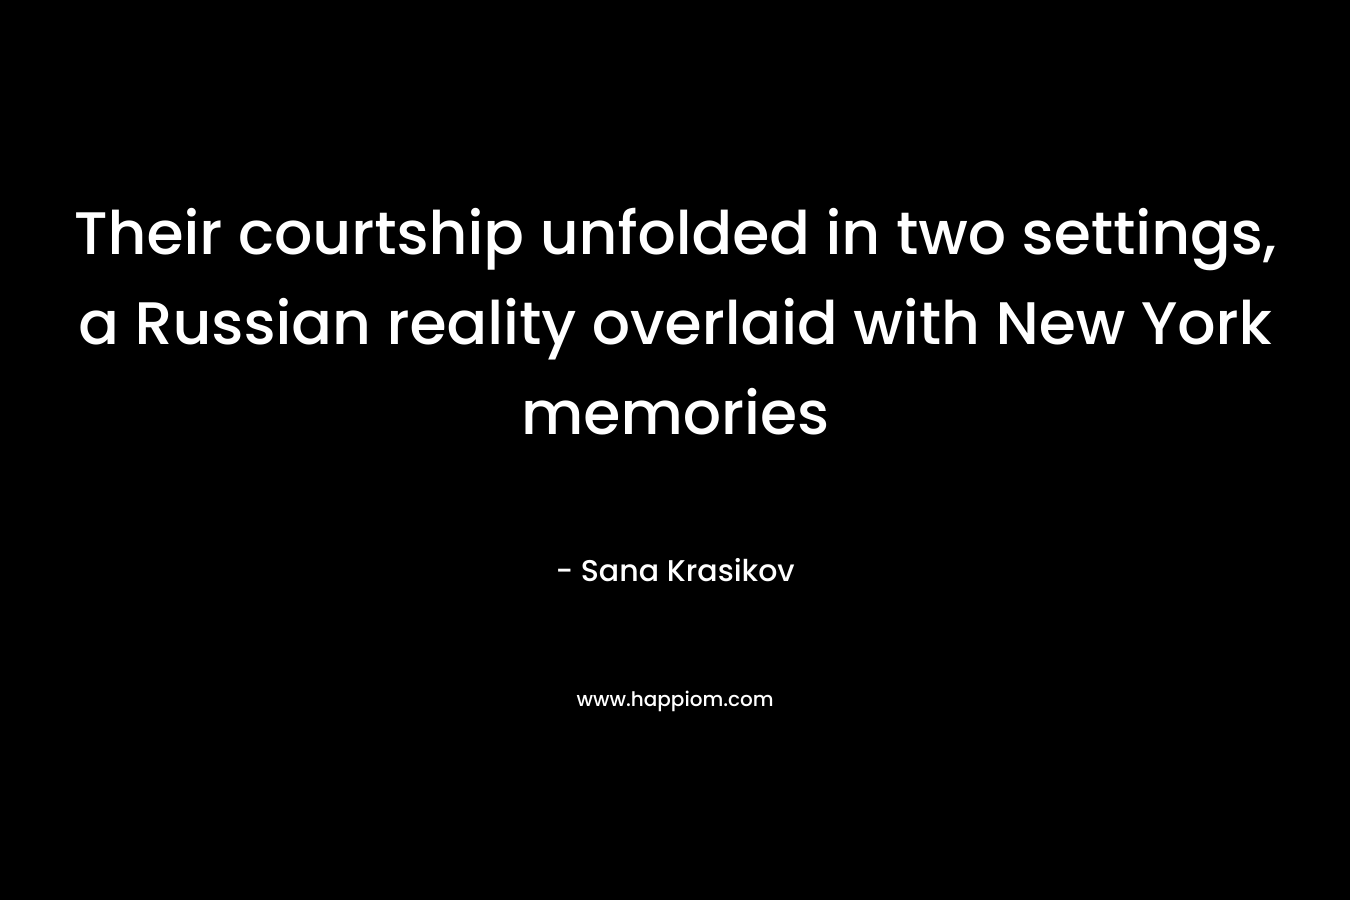 Their courtship unfolded in two settings, a Russian reality overlaid with New York memories – Sana Krasikov